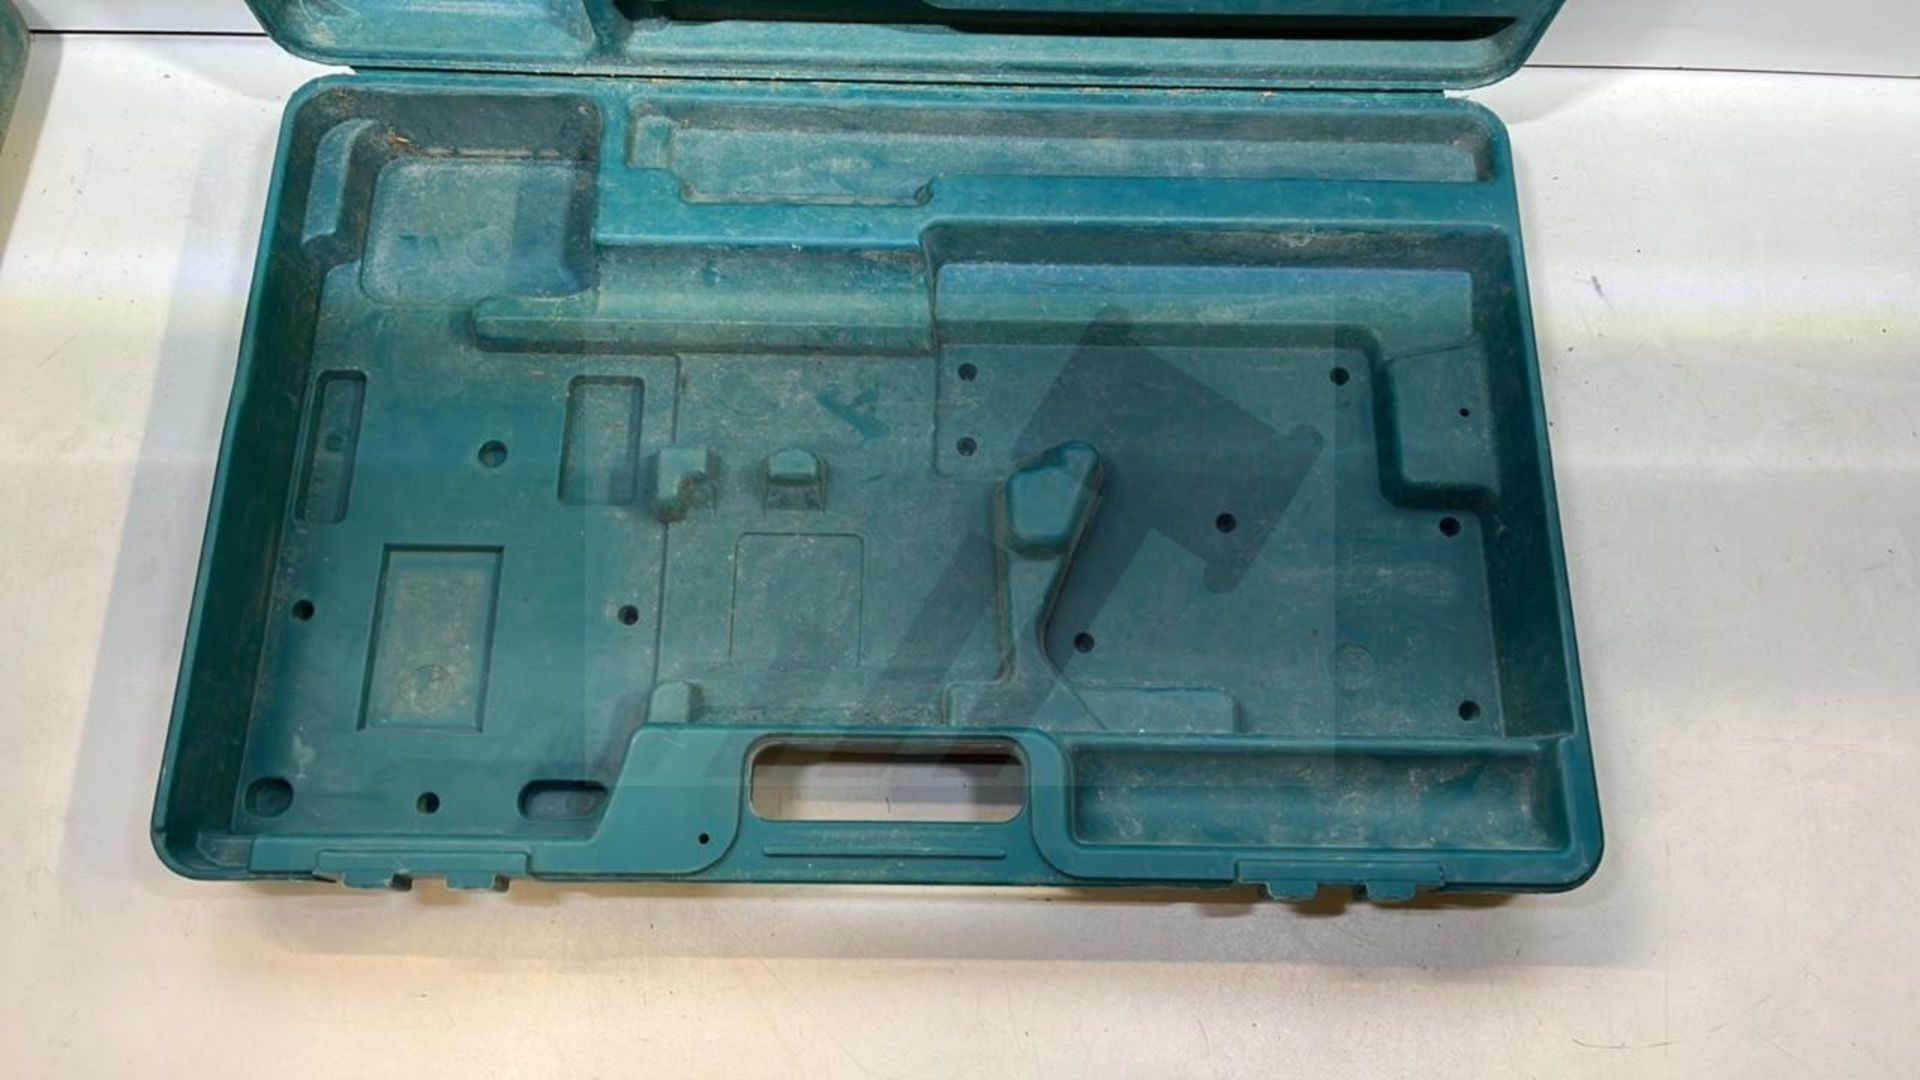 2 x Makita Empty Drill Cases - As Pictured - Image 3 of 3